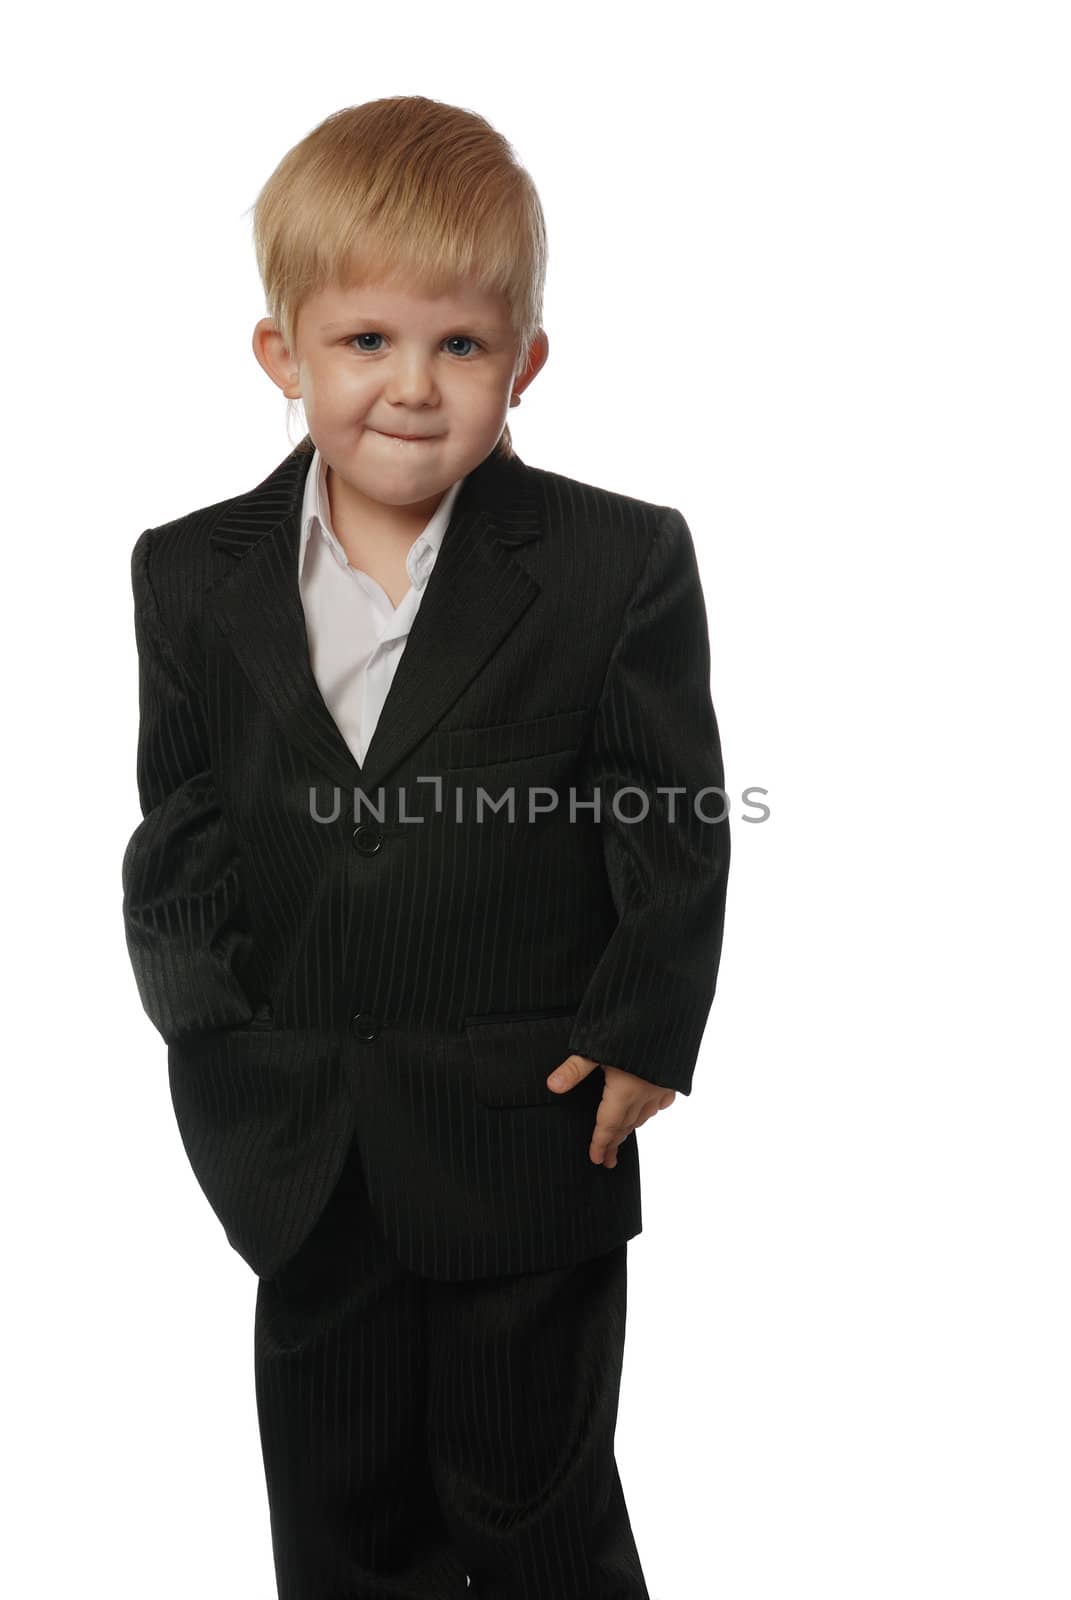 The boy in a suit. It is isolated on a white background. Age 3 years